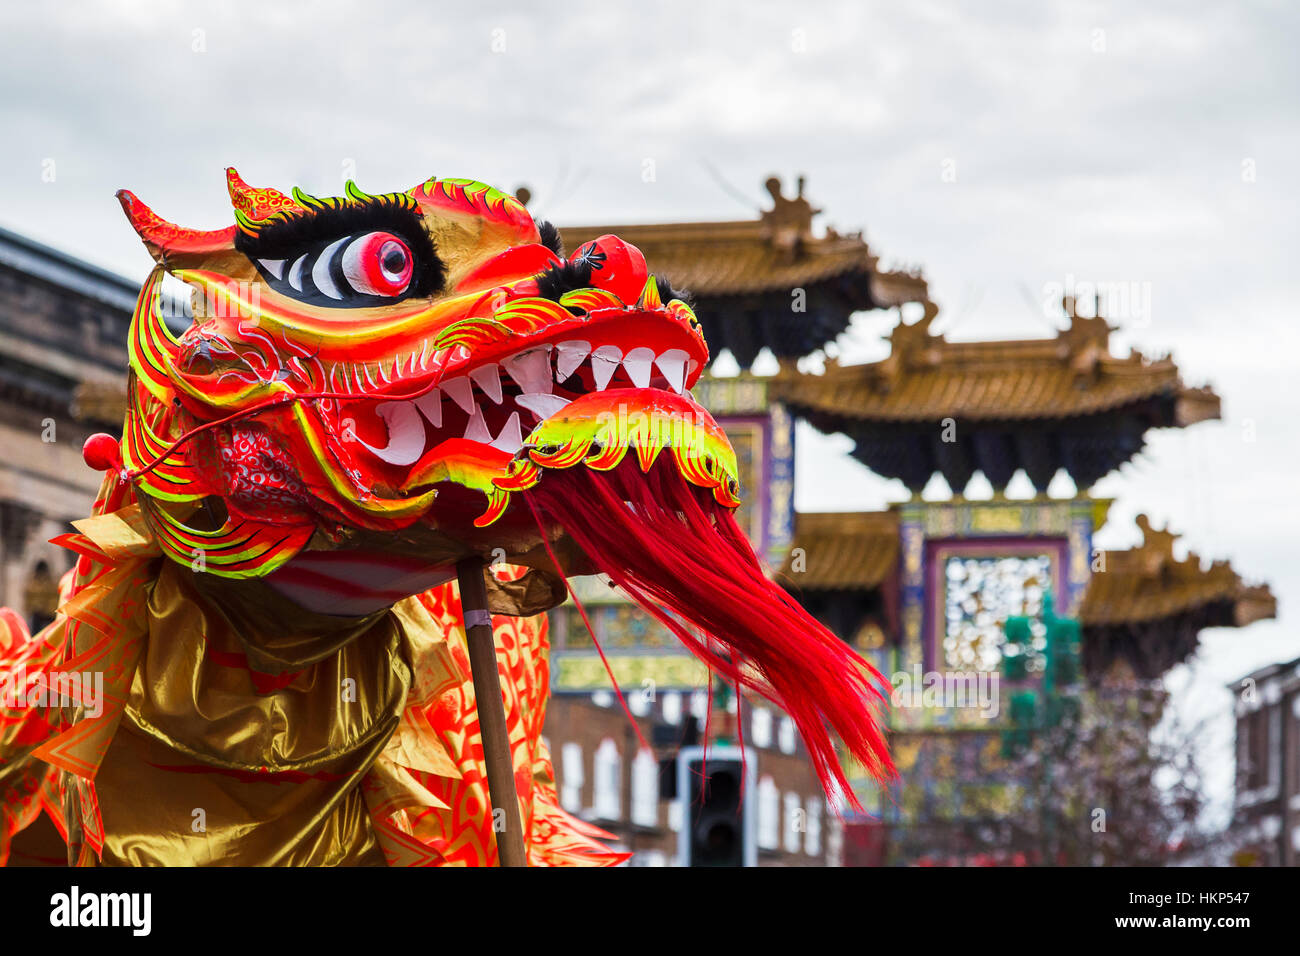 Close-up of orange and red coloured dragon in Liverpool's Chinatown chasing a pearl during Chinese New Year celebrations Stock Photo